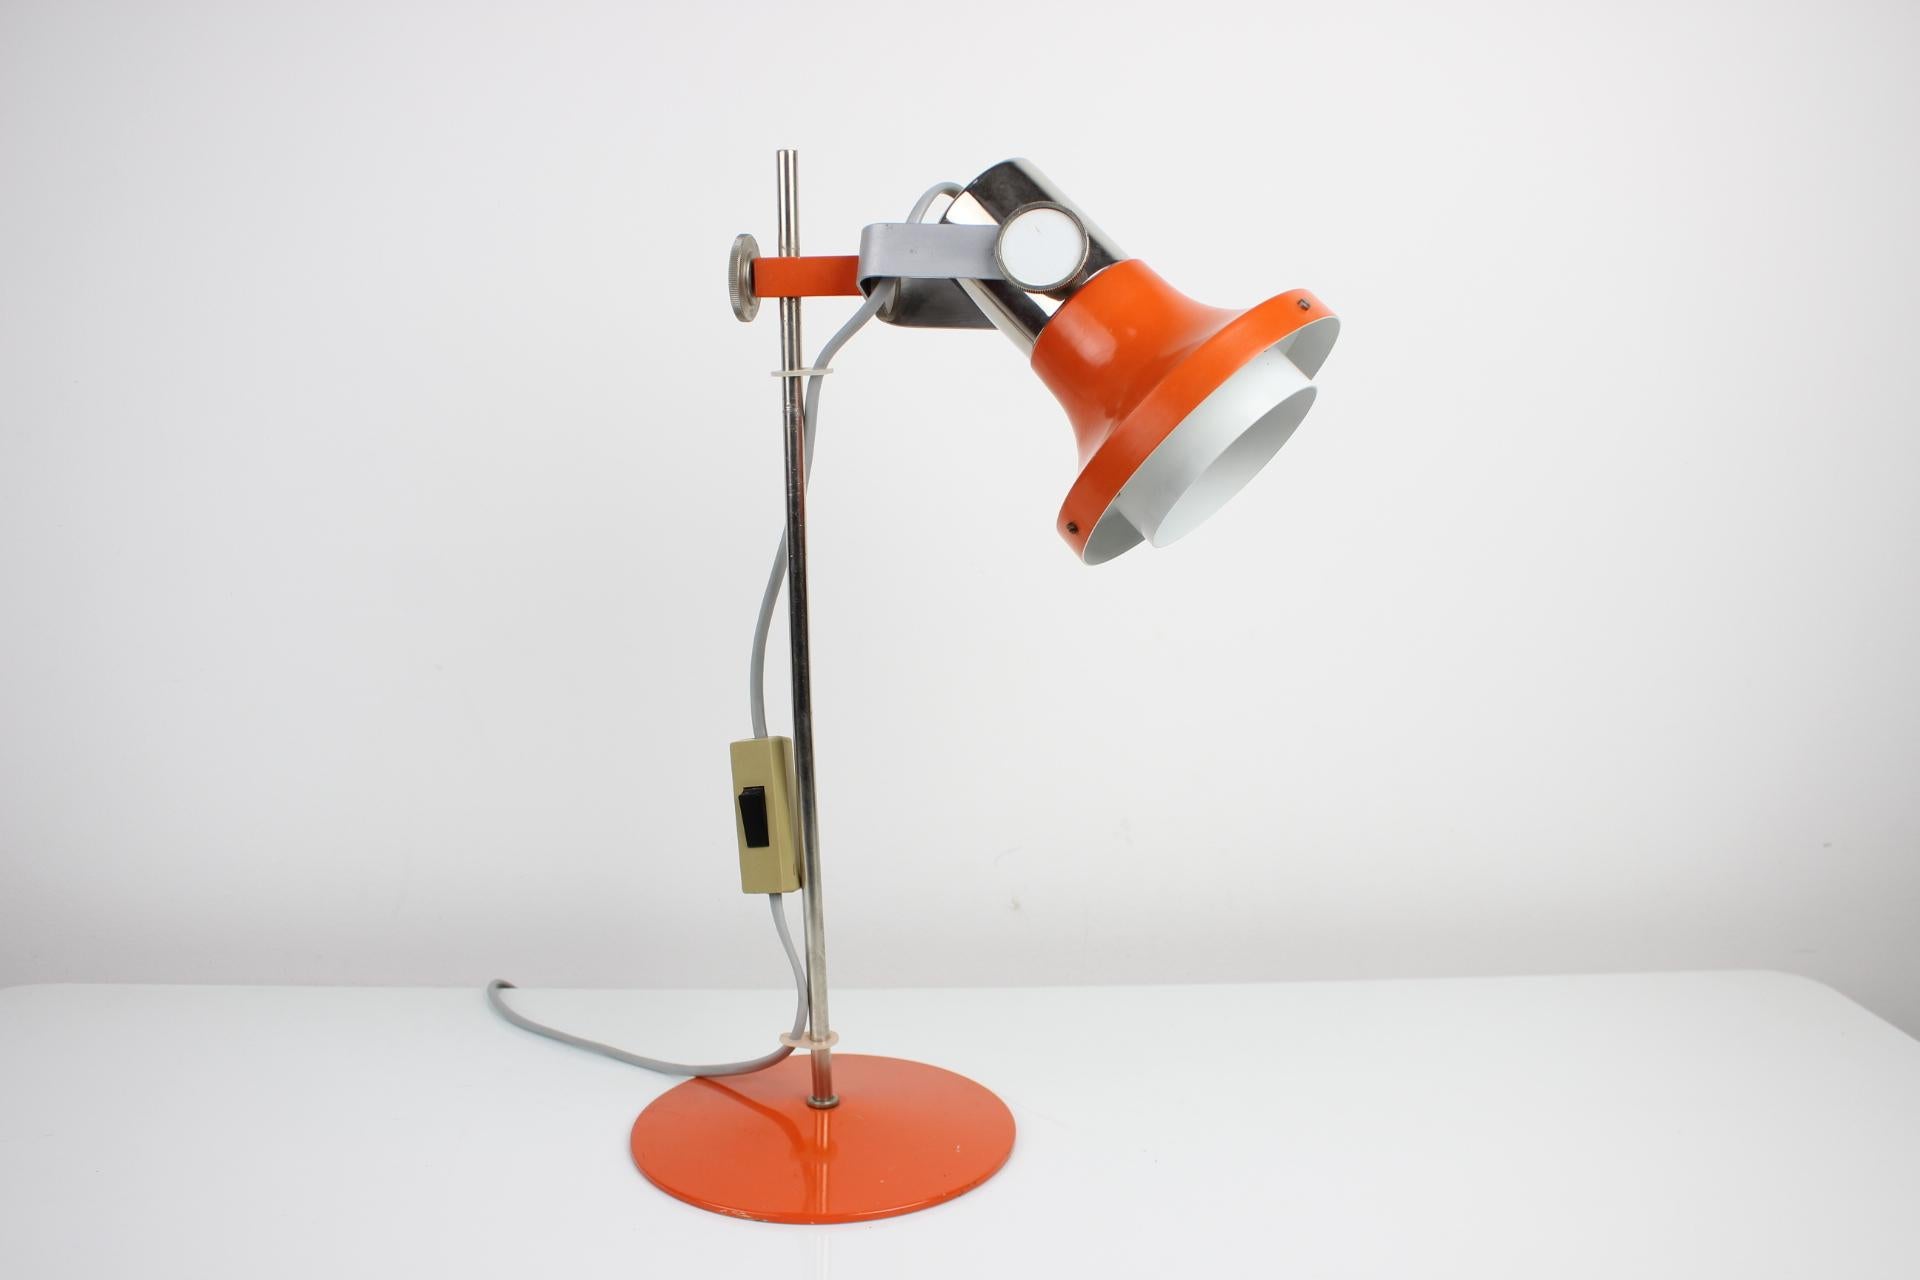 Made in Czechoslovakia
Made of painted metal, chrome
Adjustable shade
Has signs of use
Bulb 1x60W, E27 or E26
American adapter included
Original state
Color is orange.